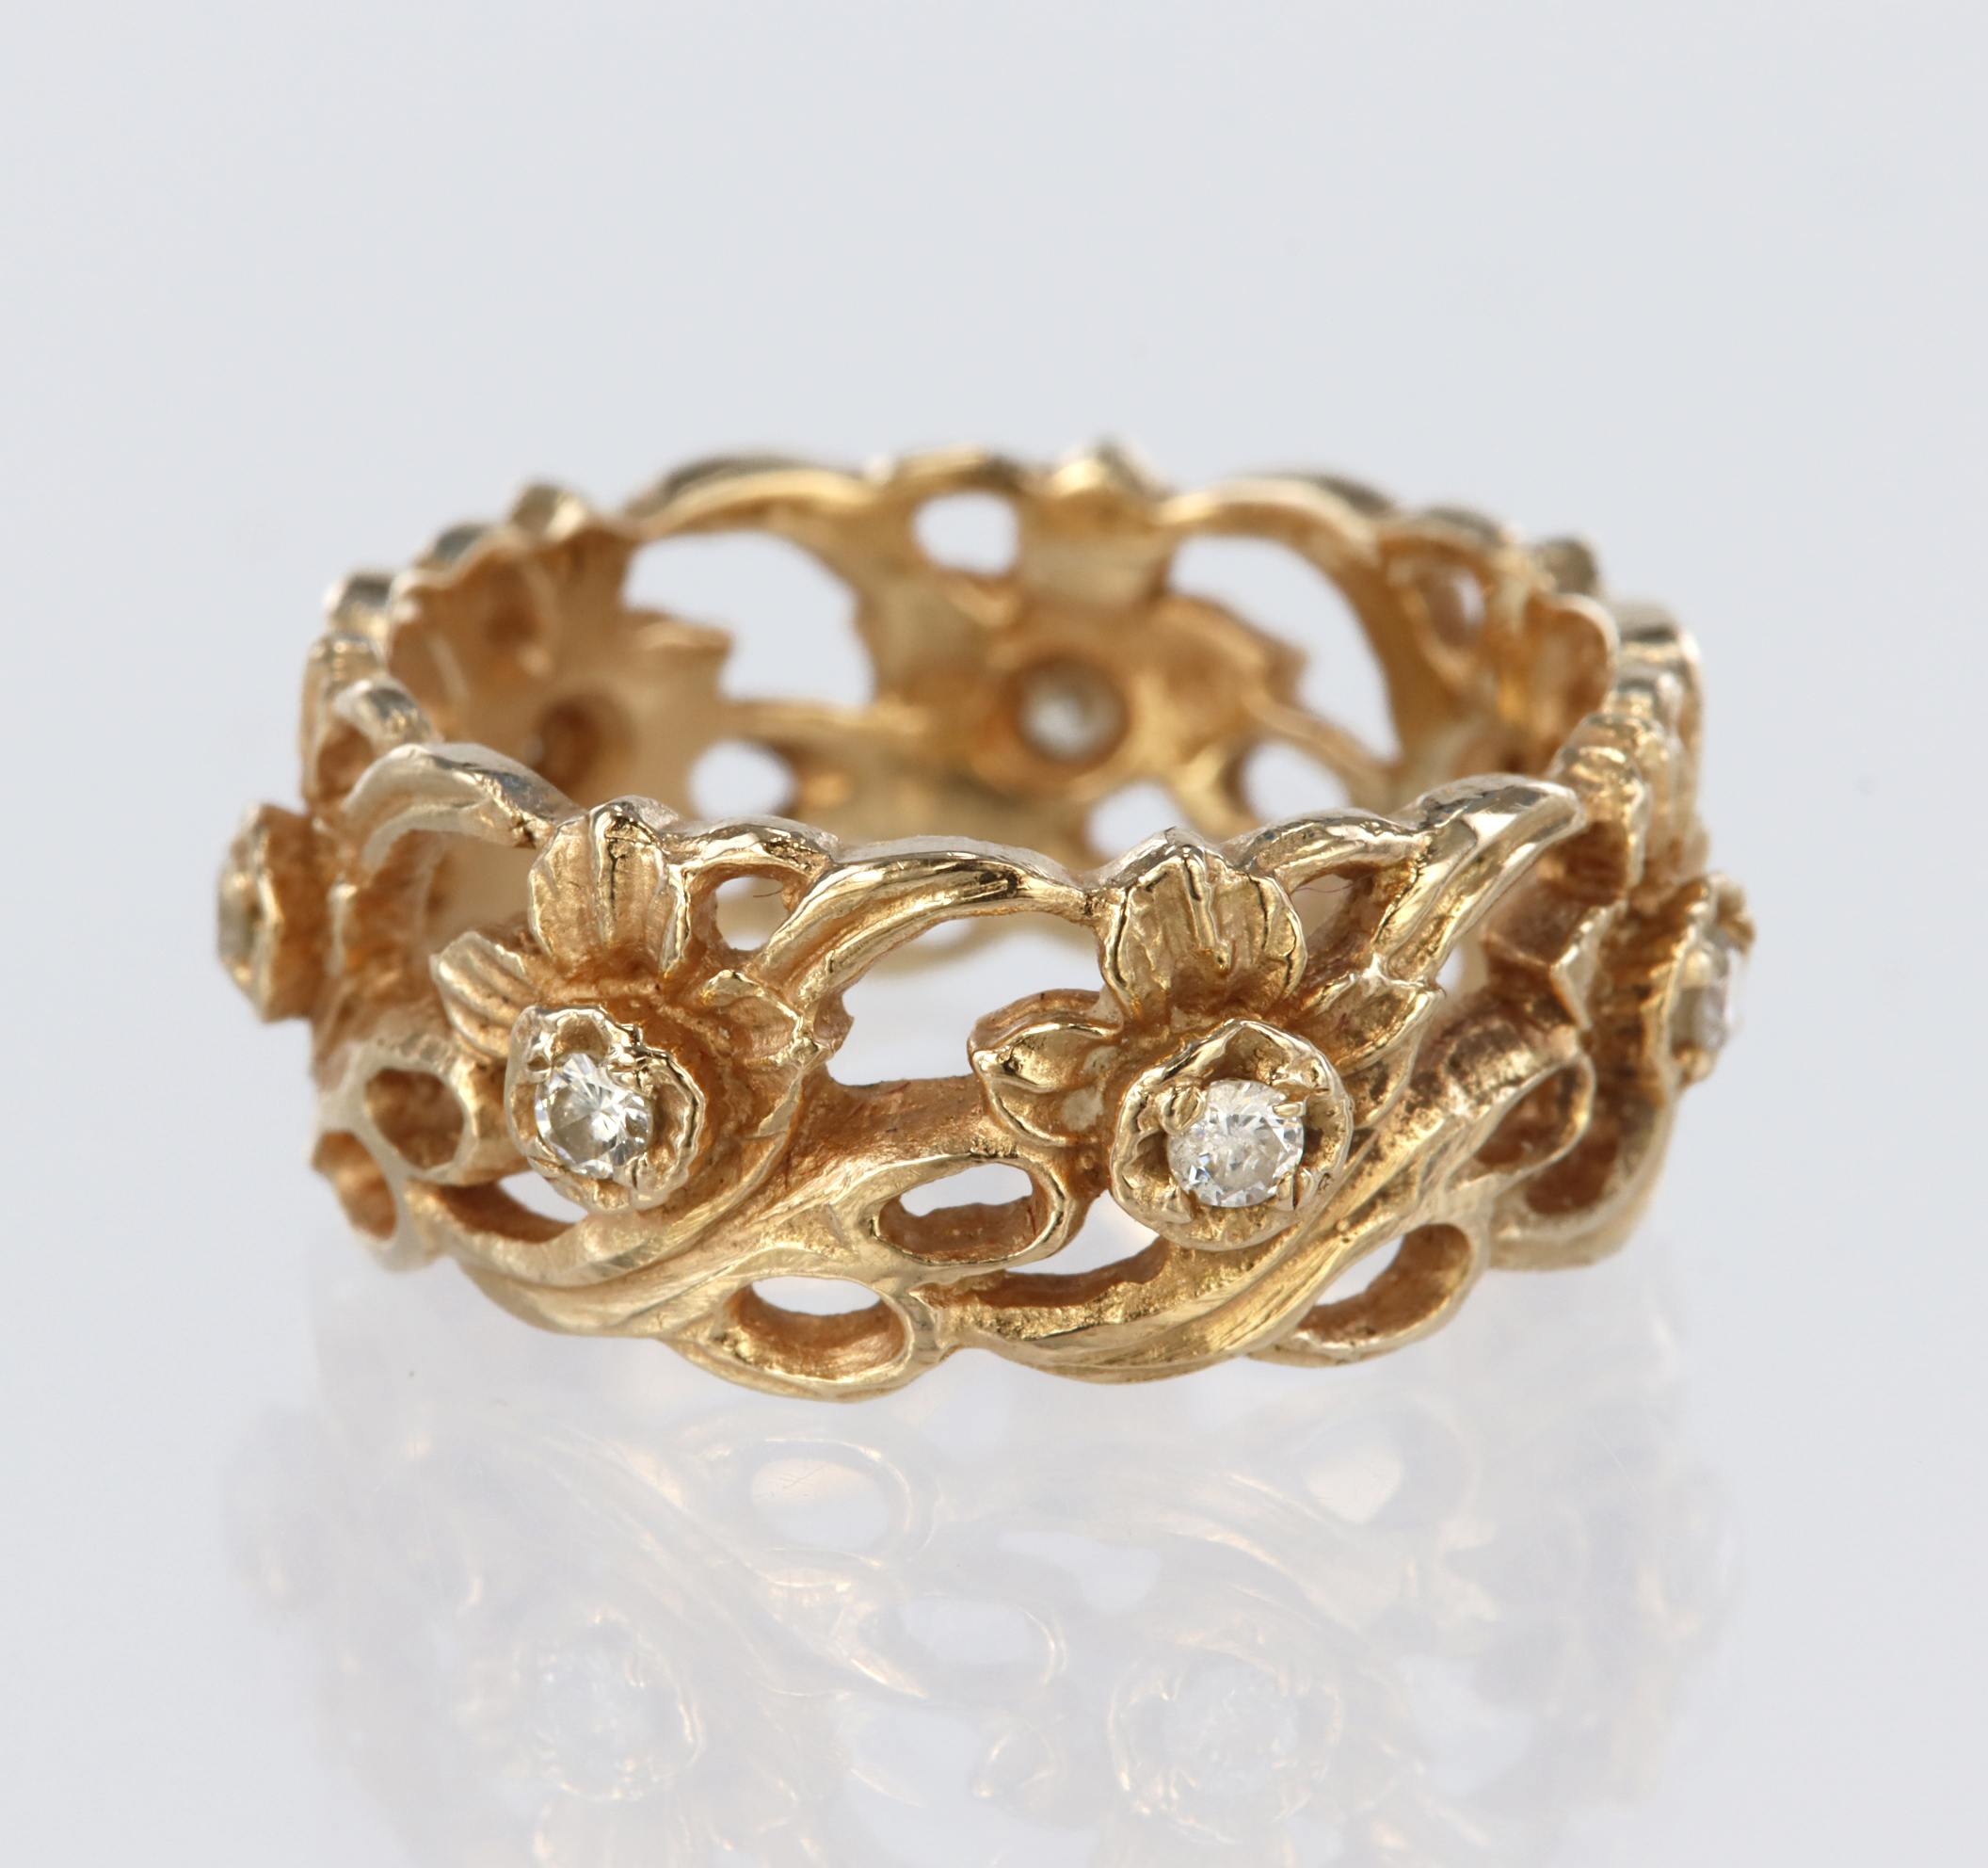 14ct (stamped 14k) diamond ring "The Welsh Gold Full Eternity Ring" by Stuart Devlin in its original